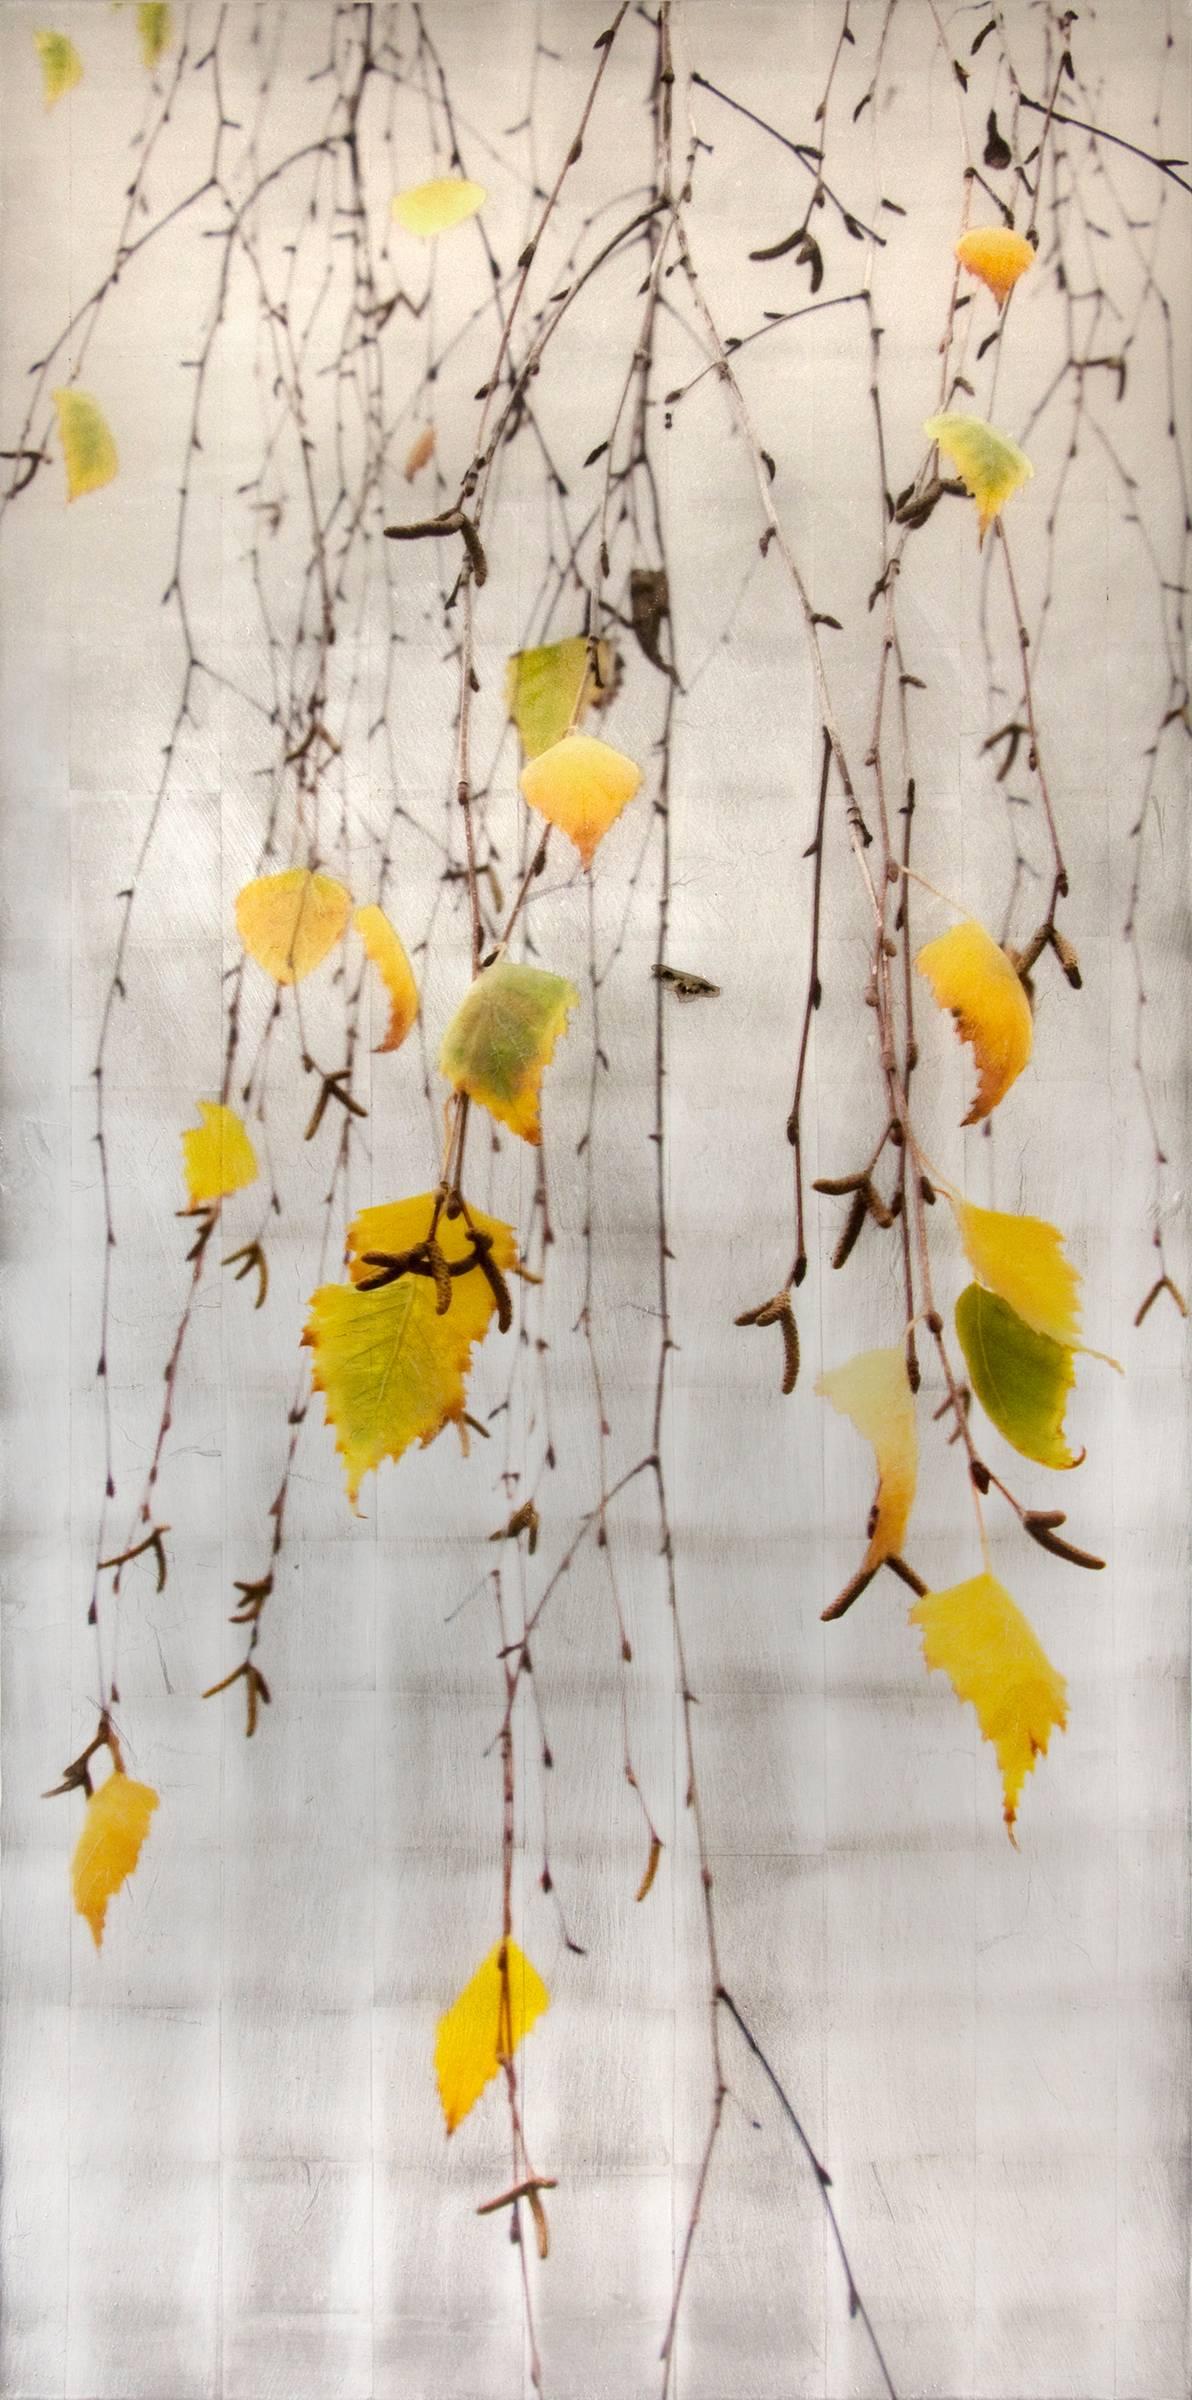 Autumn Echo, Leaves, Tree, Fall, Yellow, Brown, Silver - Mixed Media Art by Susan Goldsmith